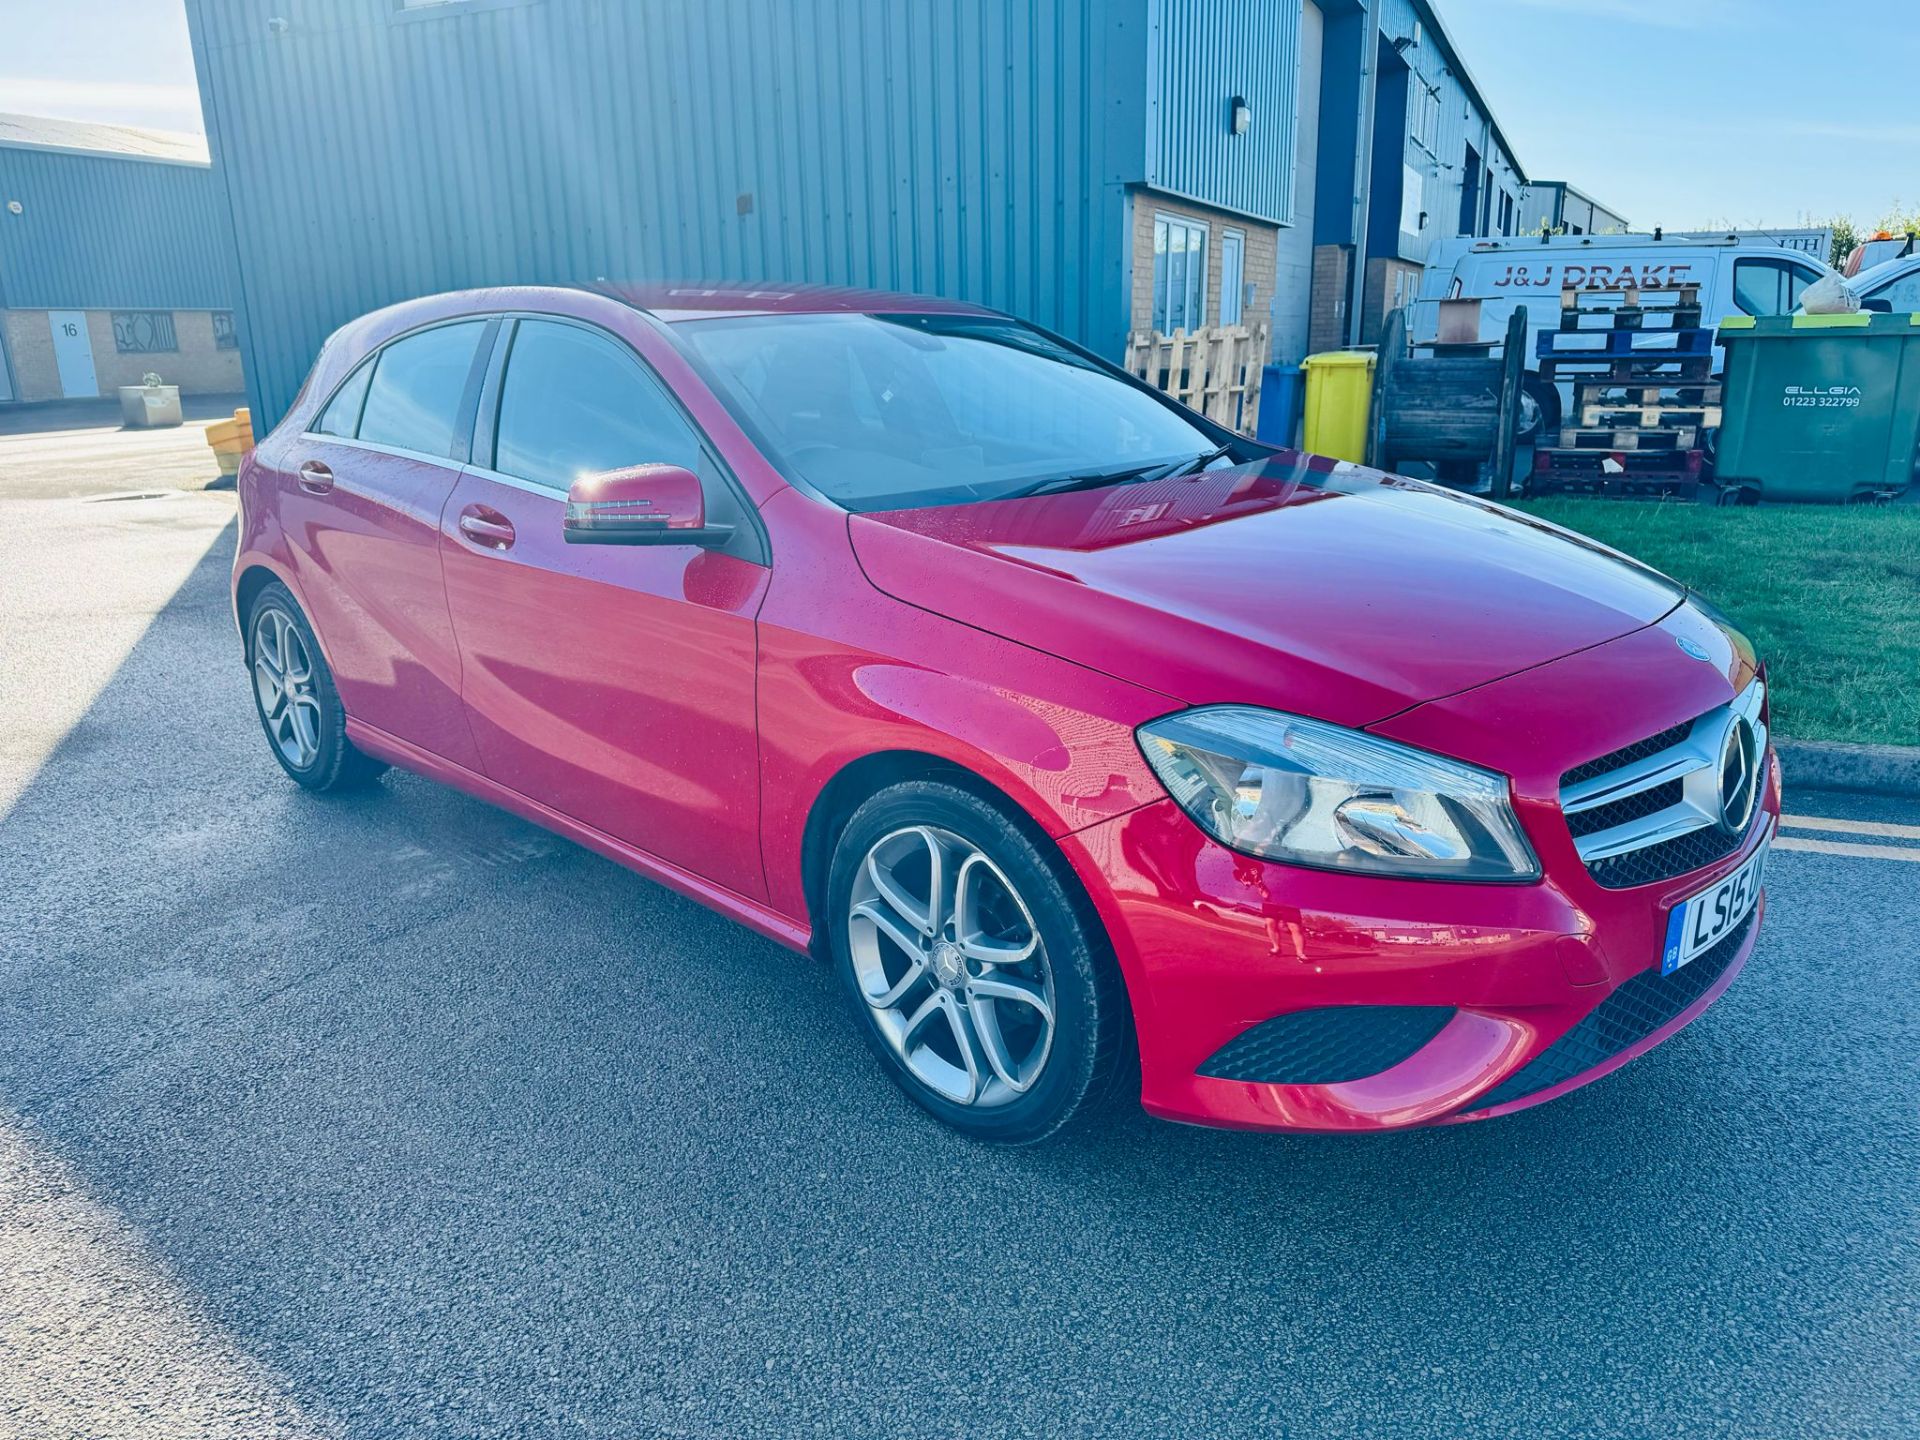 Reserve Met - MERCEDES A CLASS A180D AUTOMATIC " SPORT EDITION" 2015 15 REG - AIR CON - PART LEATHER - Image 3 of 26